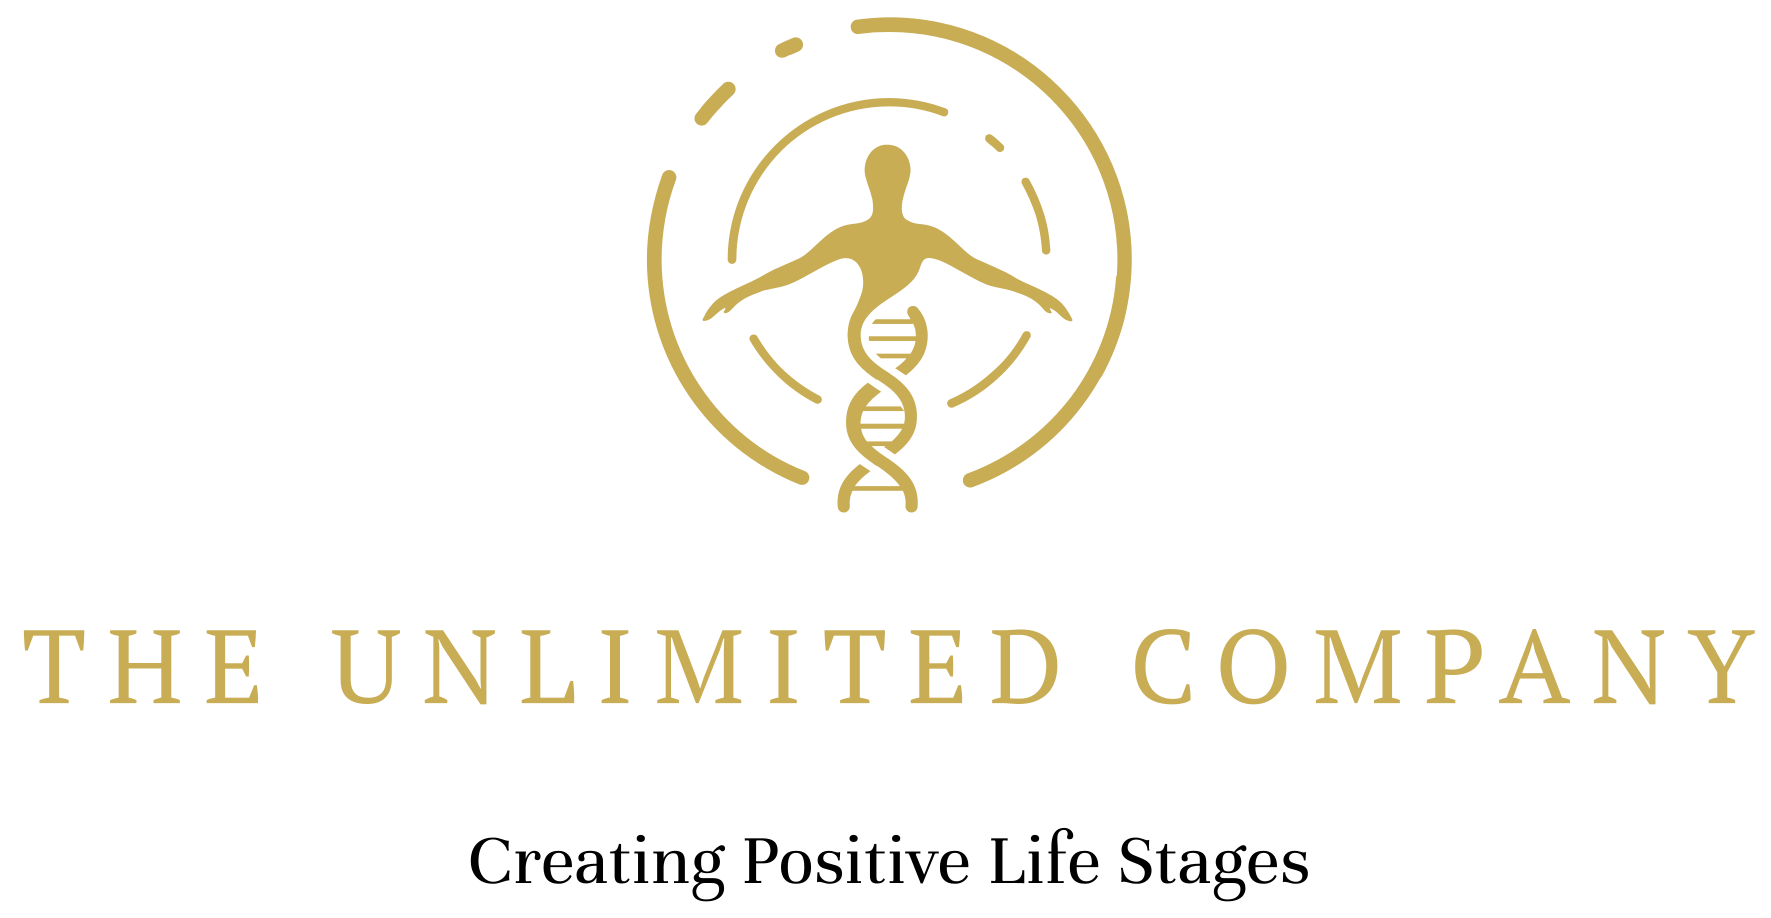 The Unlimited Company